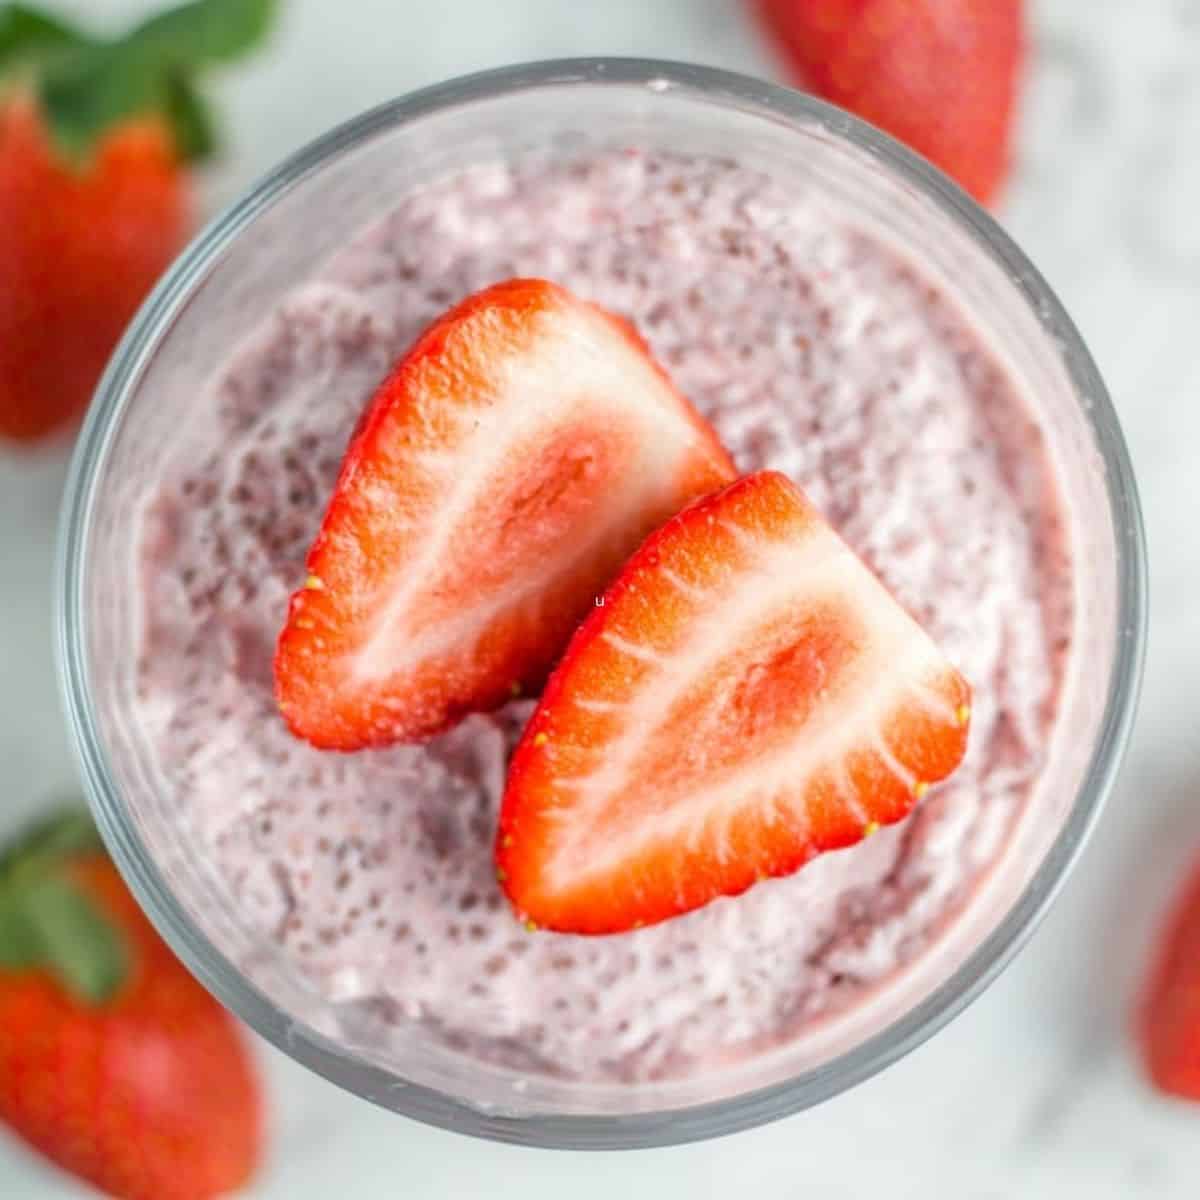 Strawberries and Cream Chia Seed Pudding